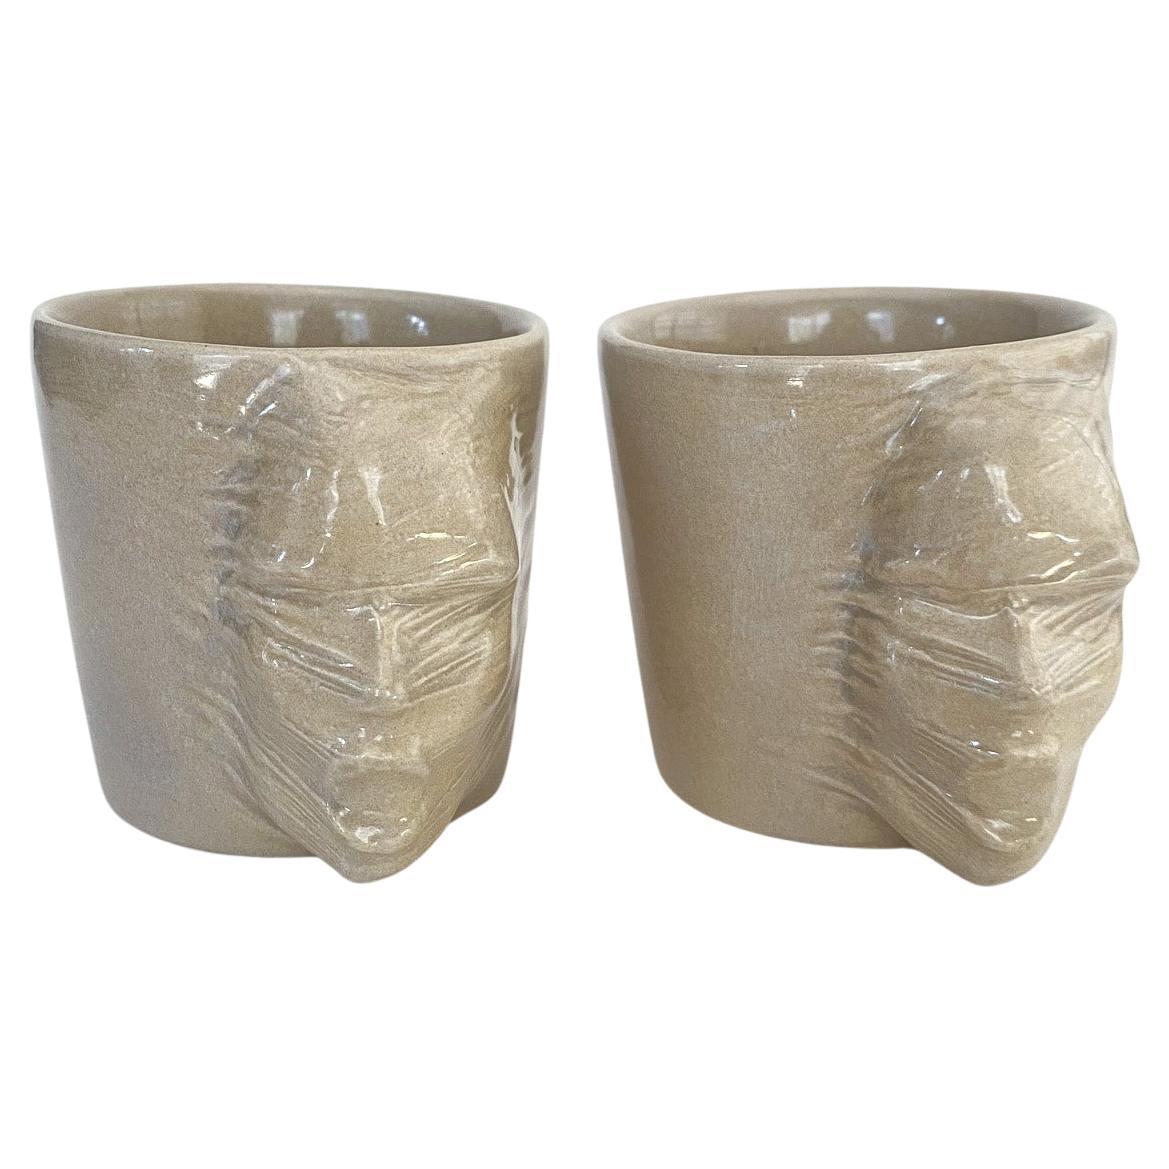 Sculptural Ceramic Cups Set of 2 by Hulya Sozer, Face Silhouette, Sand Beige For Sale